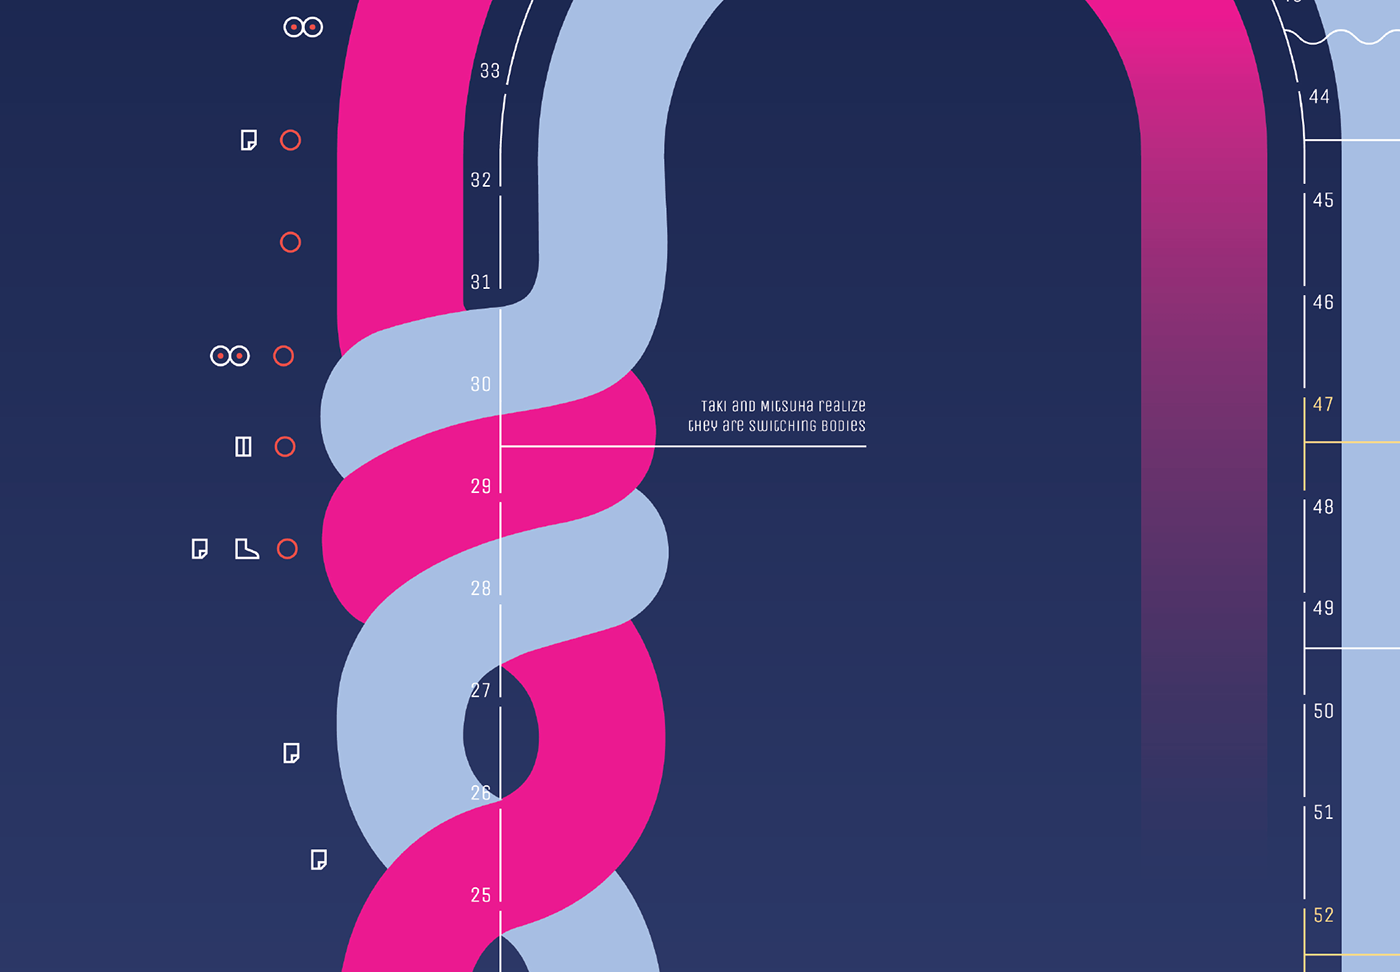 infographic timeline Film   anime Icon cords Comet data visualization